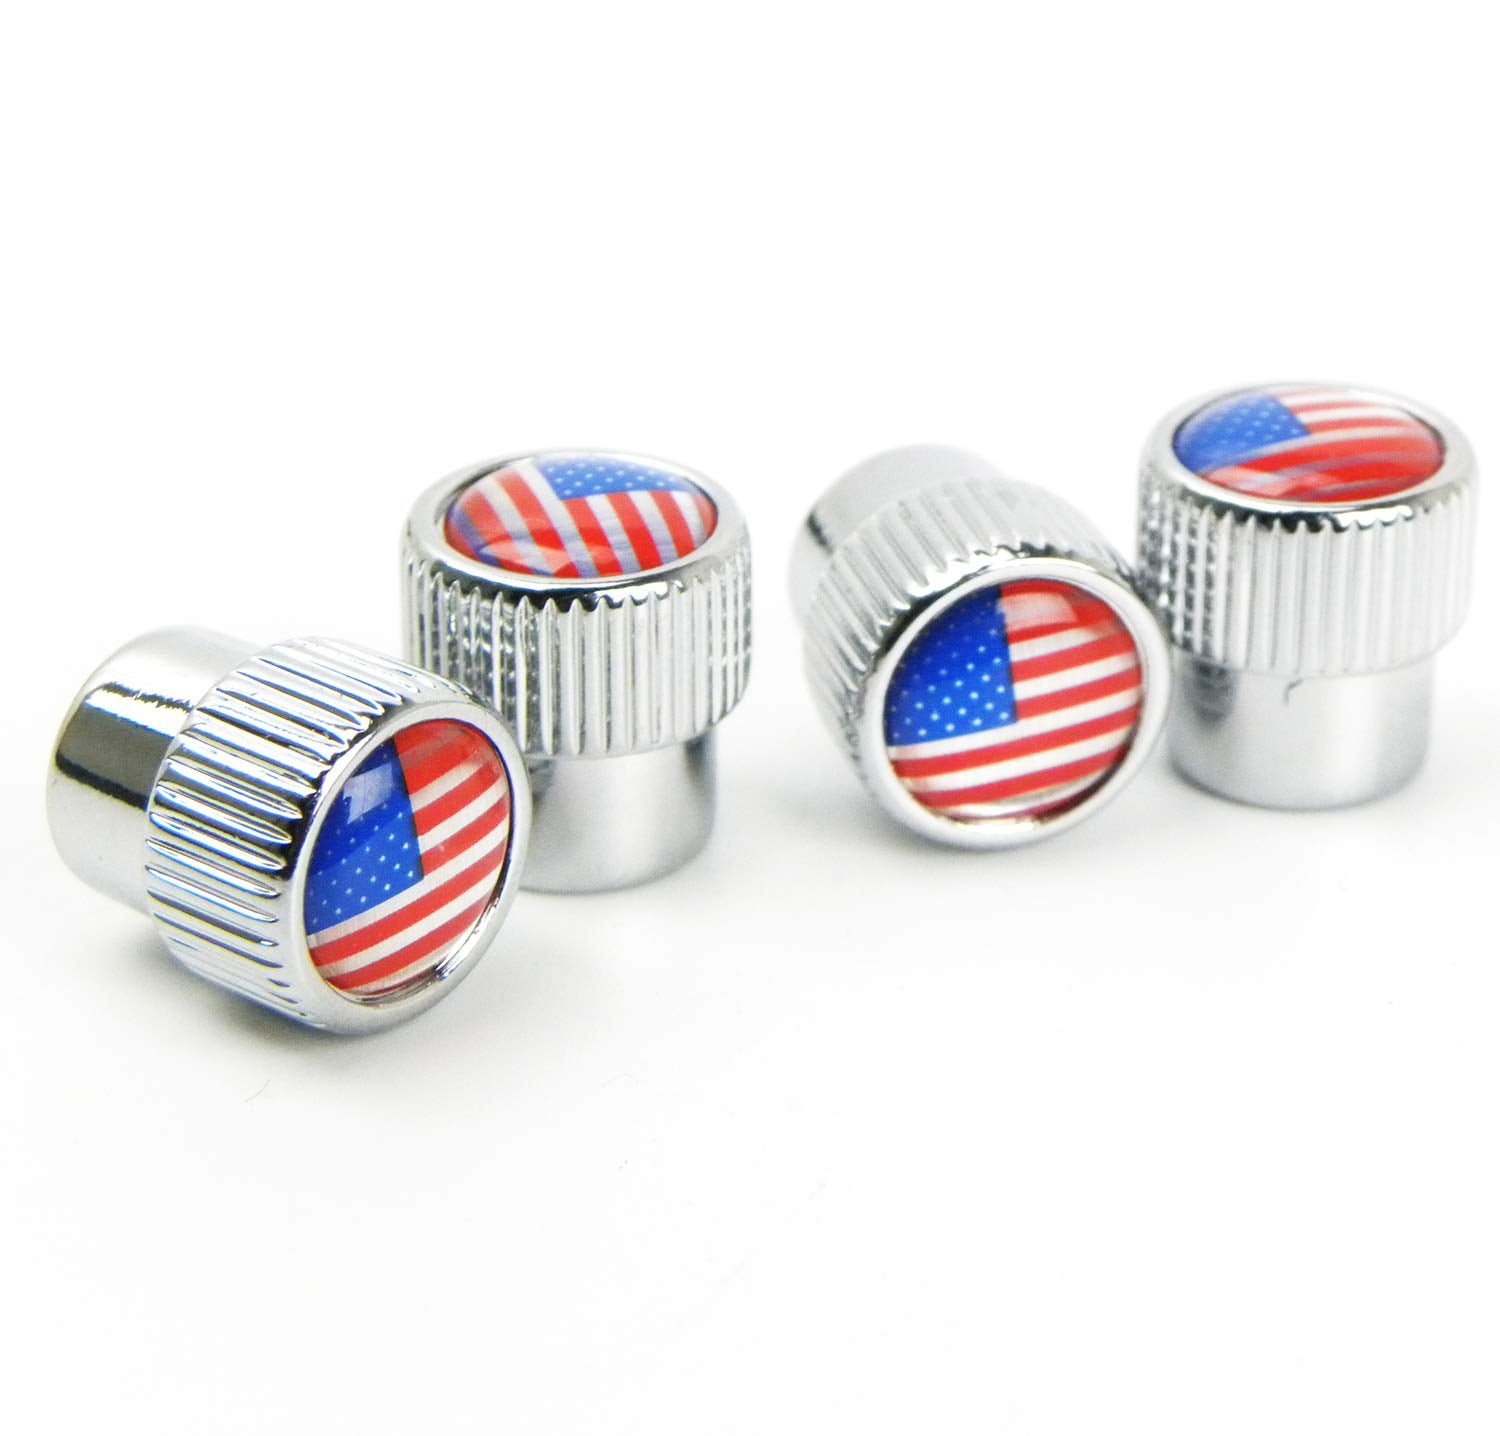 Universal Stem Covers for Car/Truck/Bicycle/Motorcycle Wheels Valve Stem caps. 4 PCS American Flag Tire Caps with O Rubber Seal Feiccier Tire Valve Stem Caps